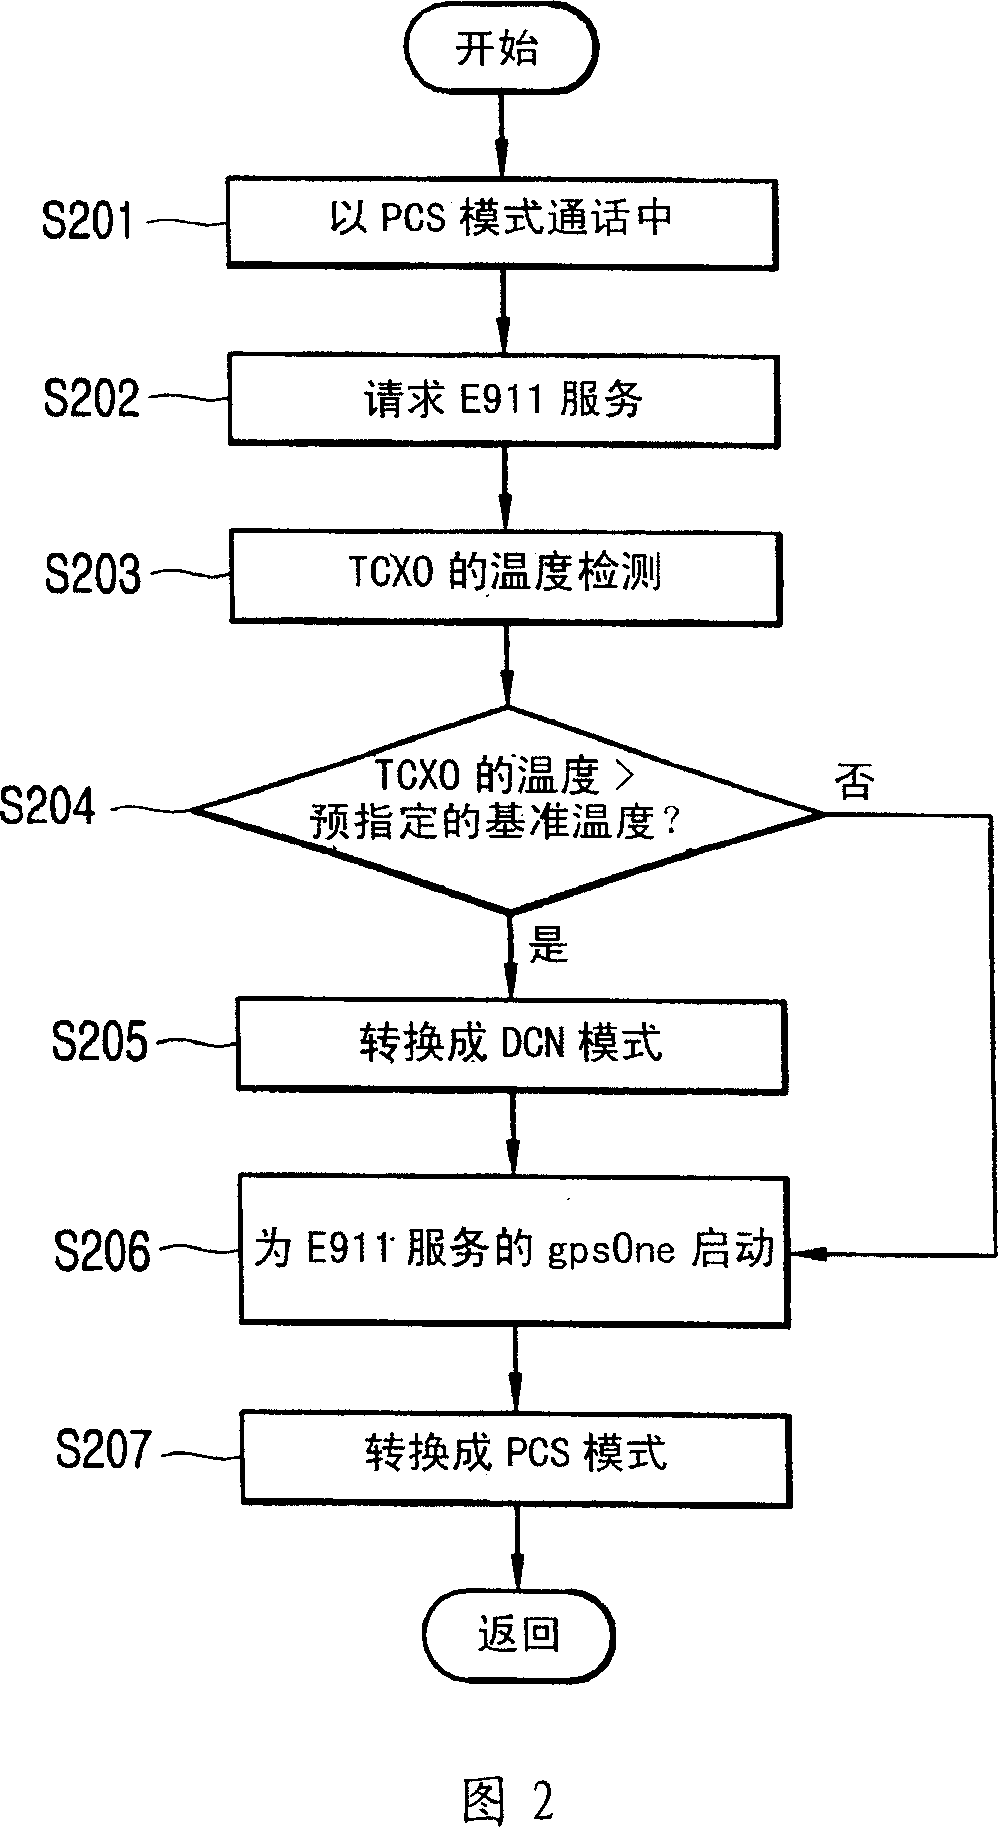 Switching device and method for mobile communication terminal